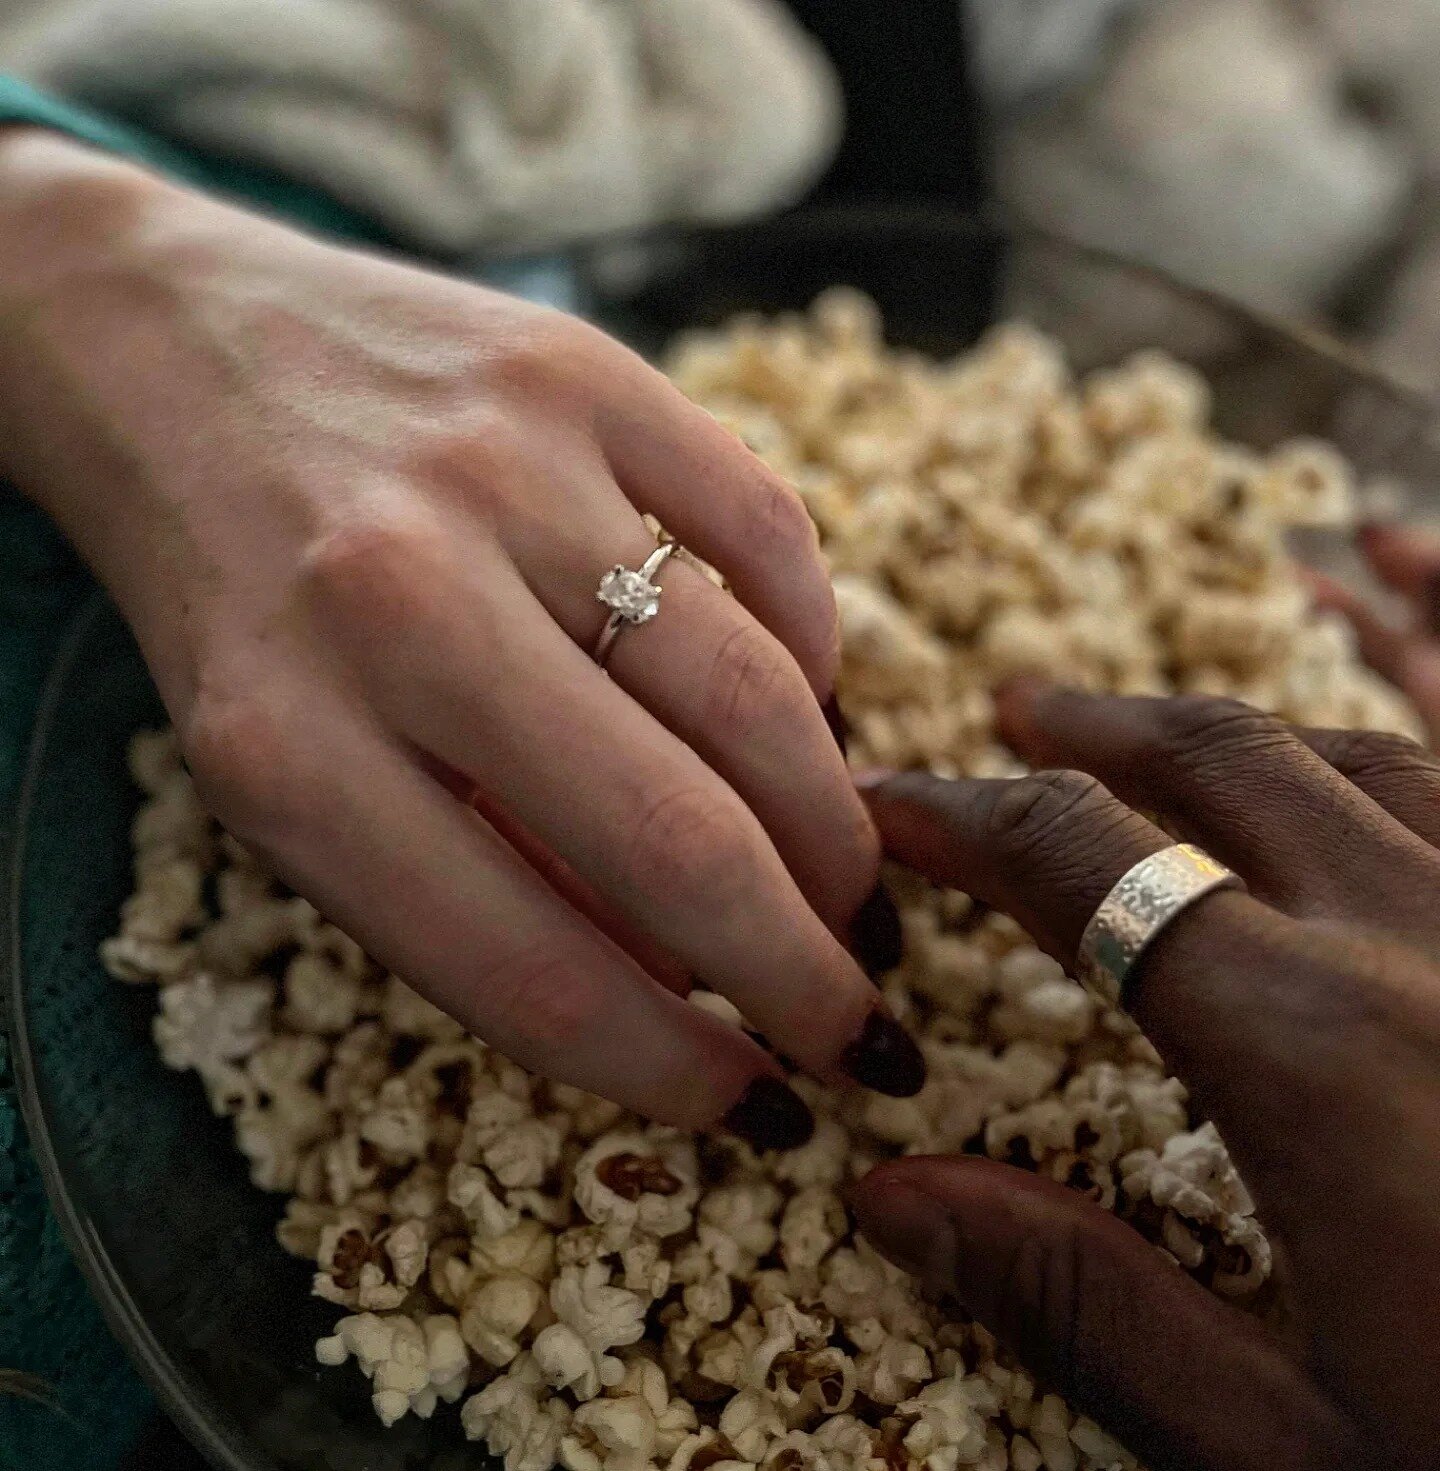 We love it when clients send us images to share on socials, especially when we know that something that we have created is the start of of new chapter in their lives. 

This lovely client popped the question, popped some corn and took this awesome sh